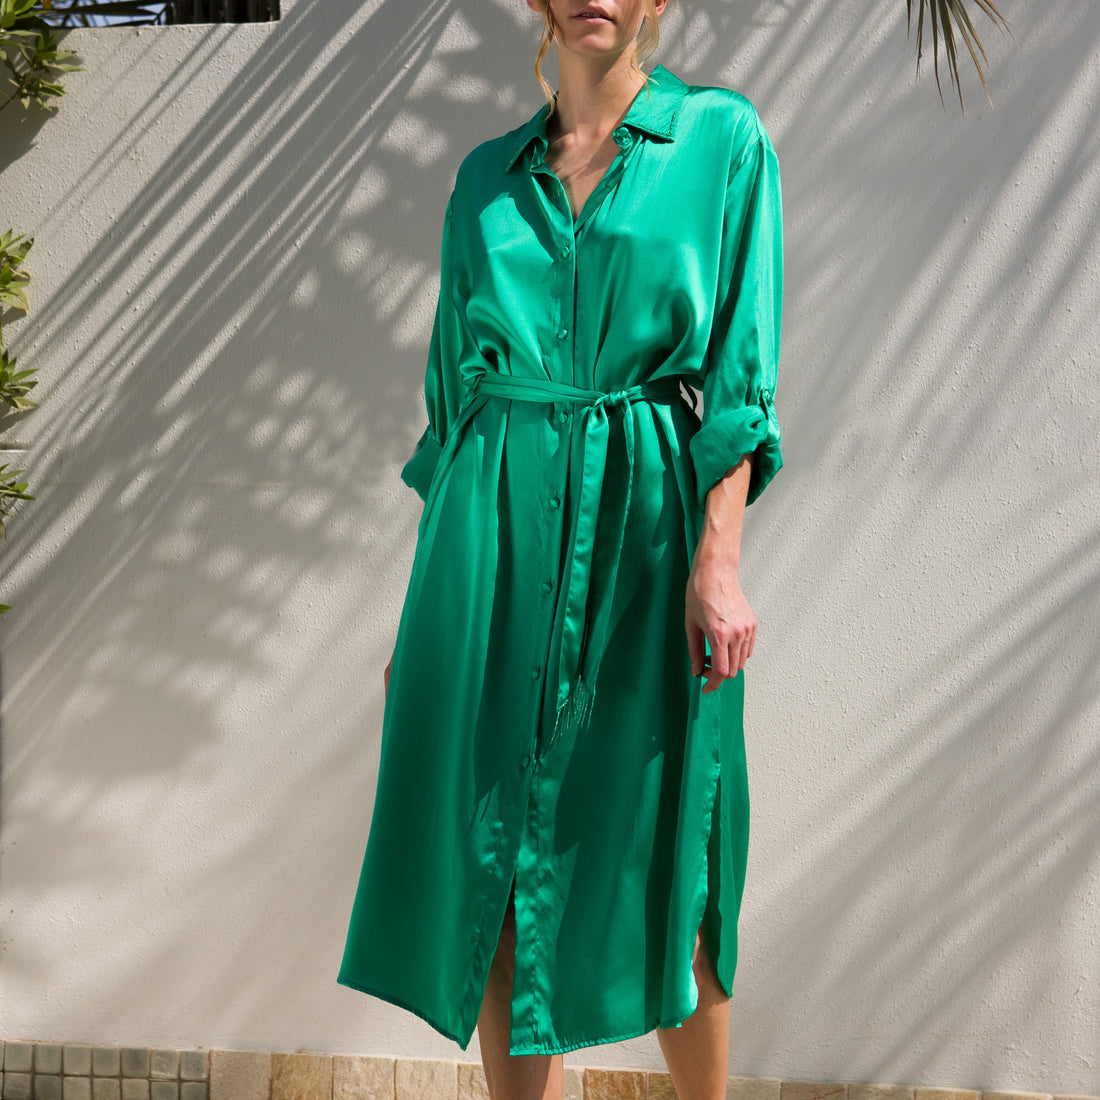 Graceful one-size silk gown with a comfortable, relaxed fit